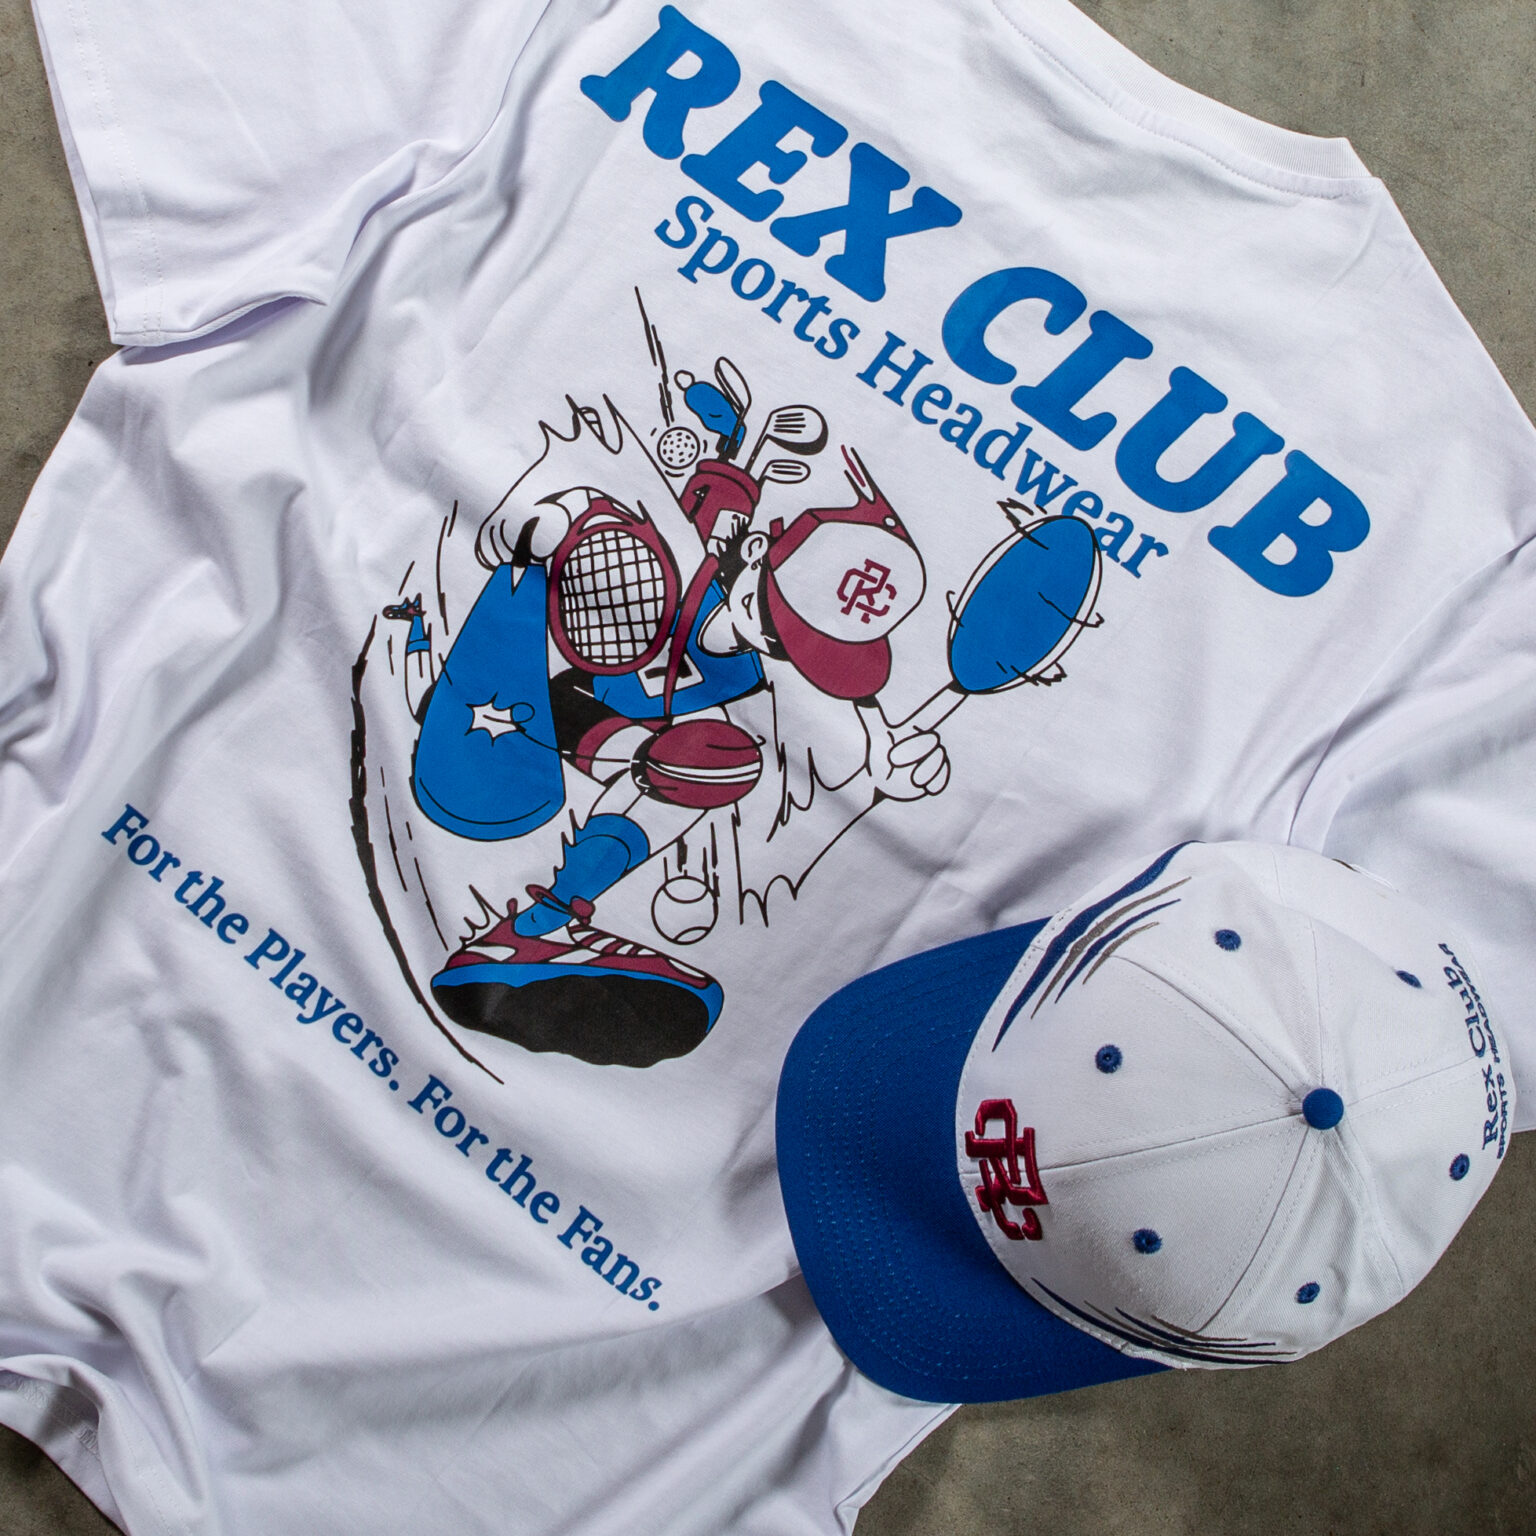 Rex Club | A white T-shirt featuring a baseball player graphic and the text "Rex the Lion" is laid flat. Below the graphic, it reads, "For the Players. For the Fans." Beside the T-shirt is a white and blue baseball cap with the same logo. | Custom Caps | Custom Hats | Team Headwear | UK